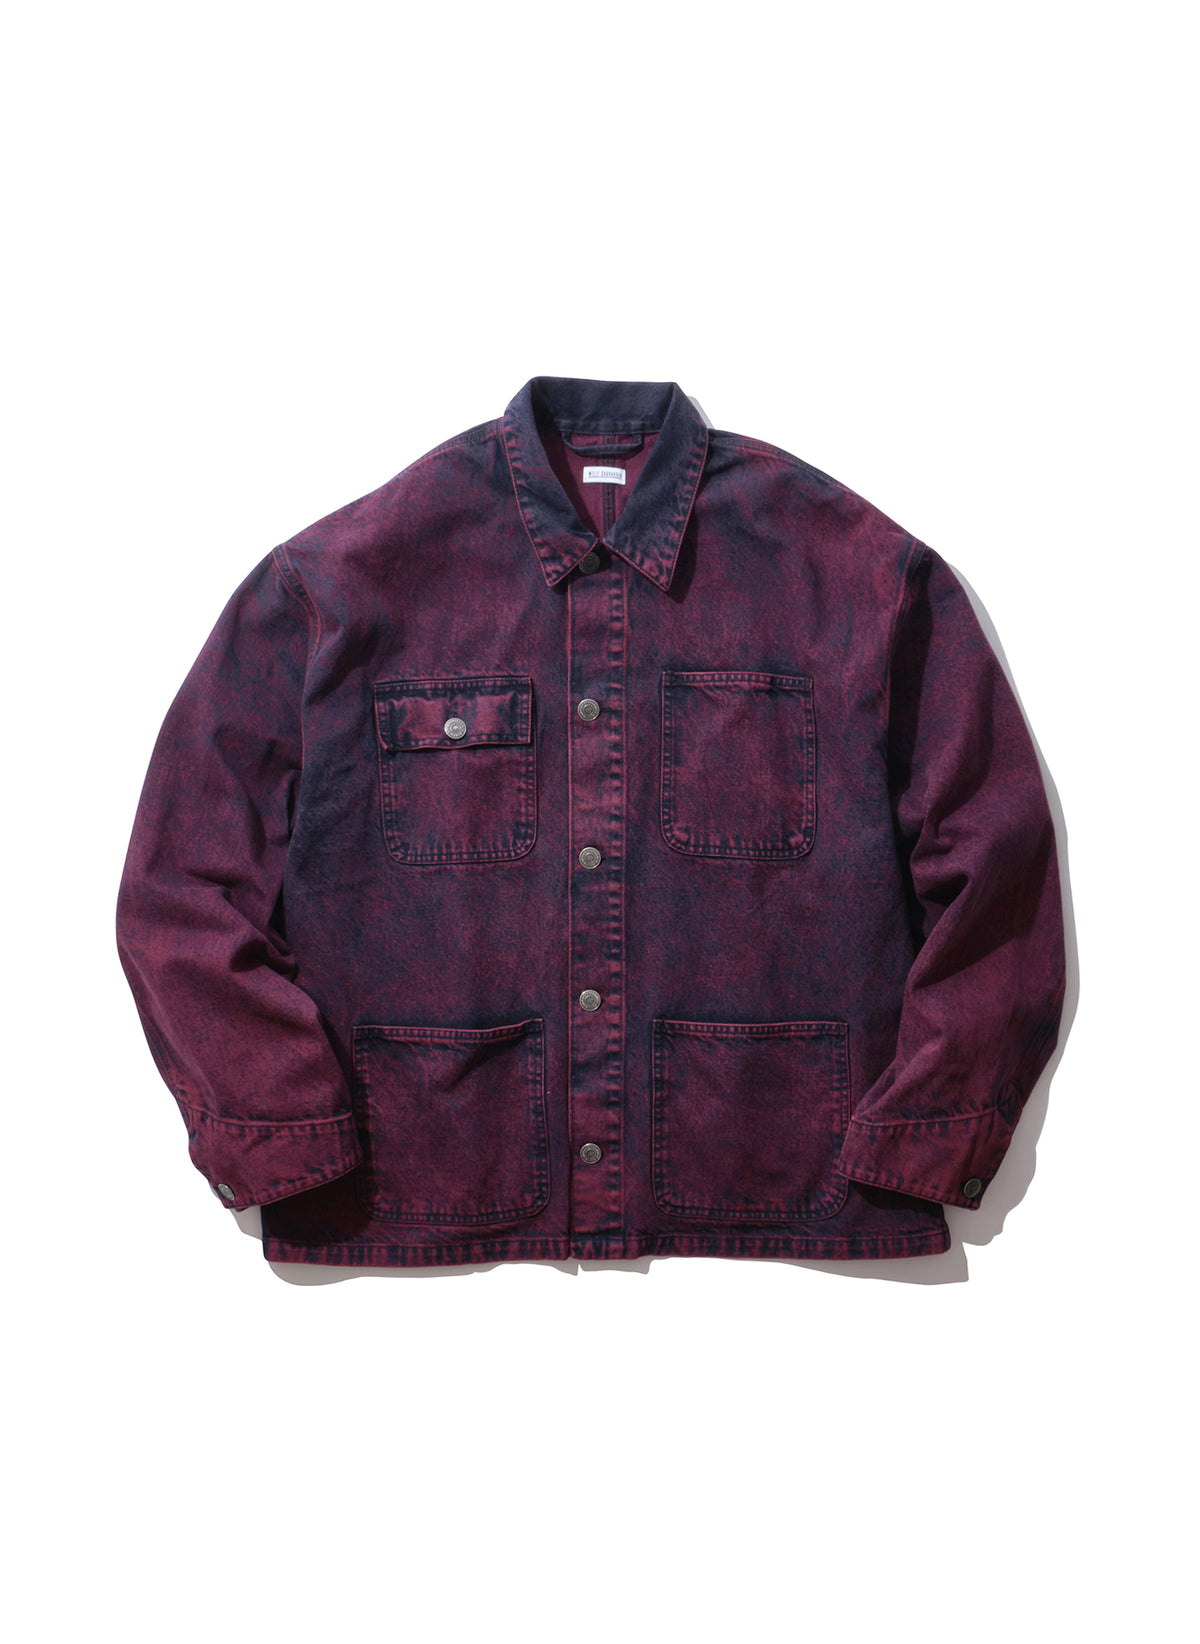 WILLY CHAVARRIA / BIG DADDY JACKET OVERD PINK